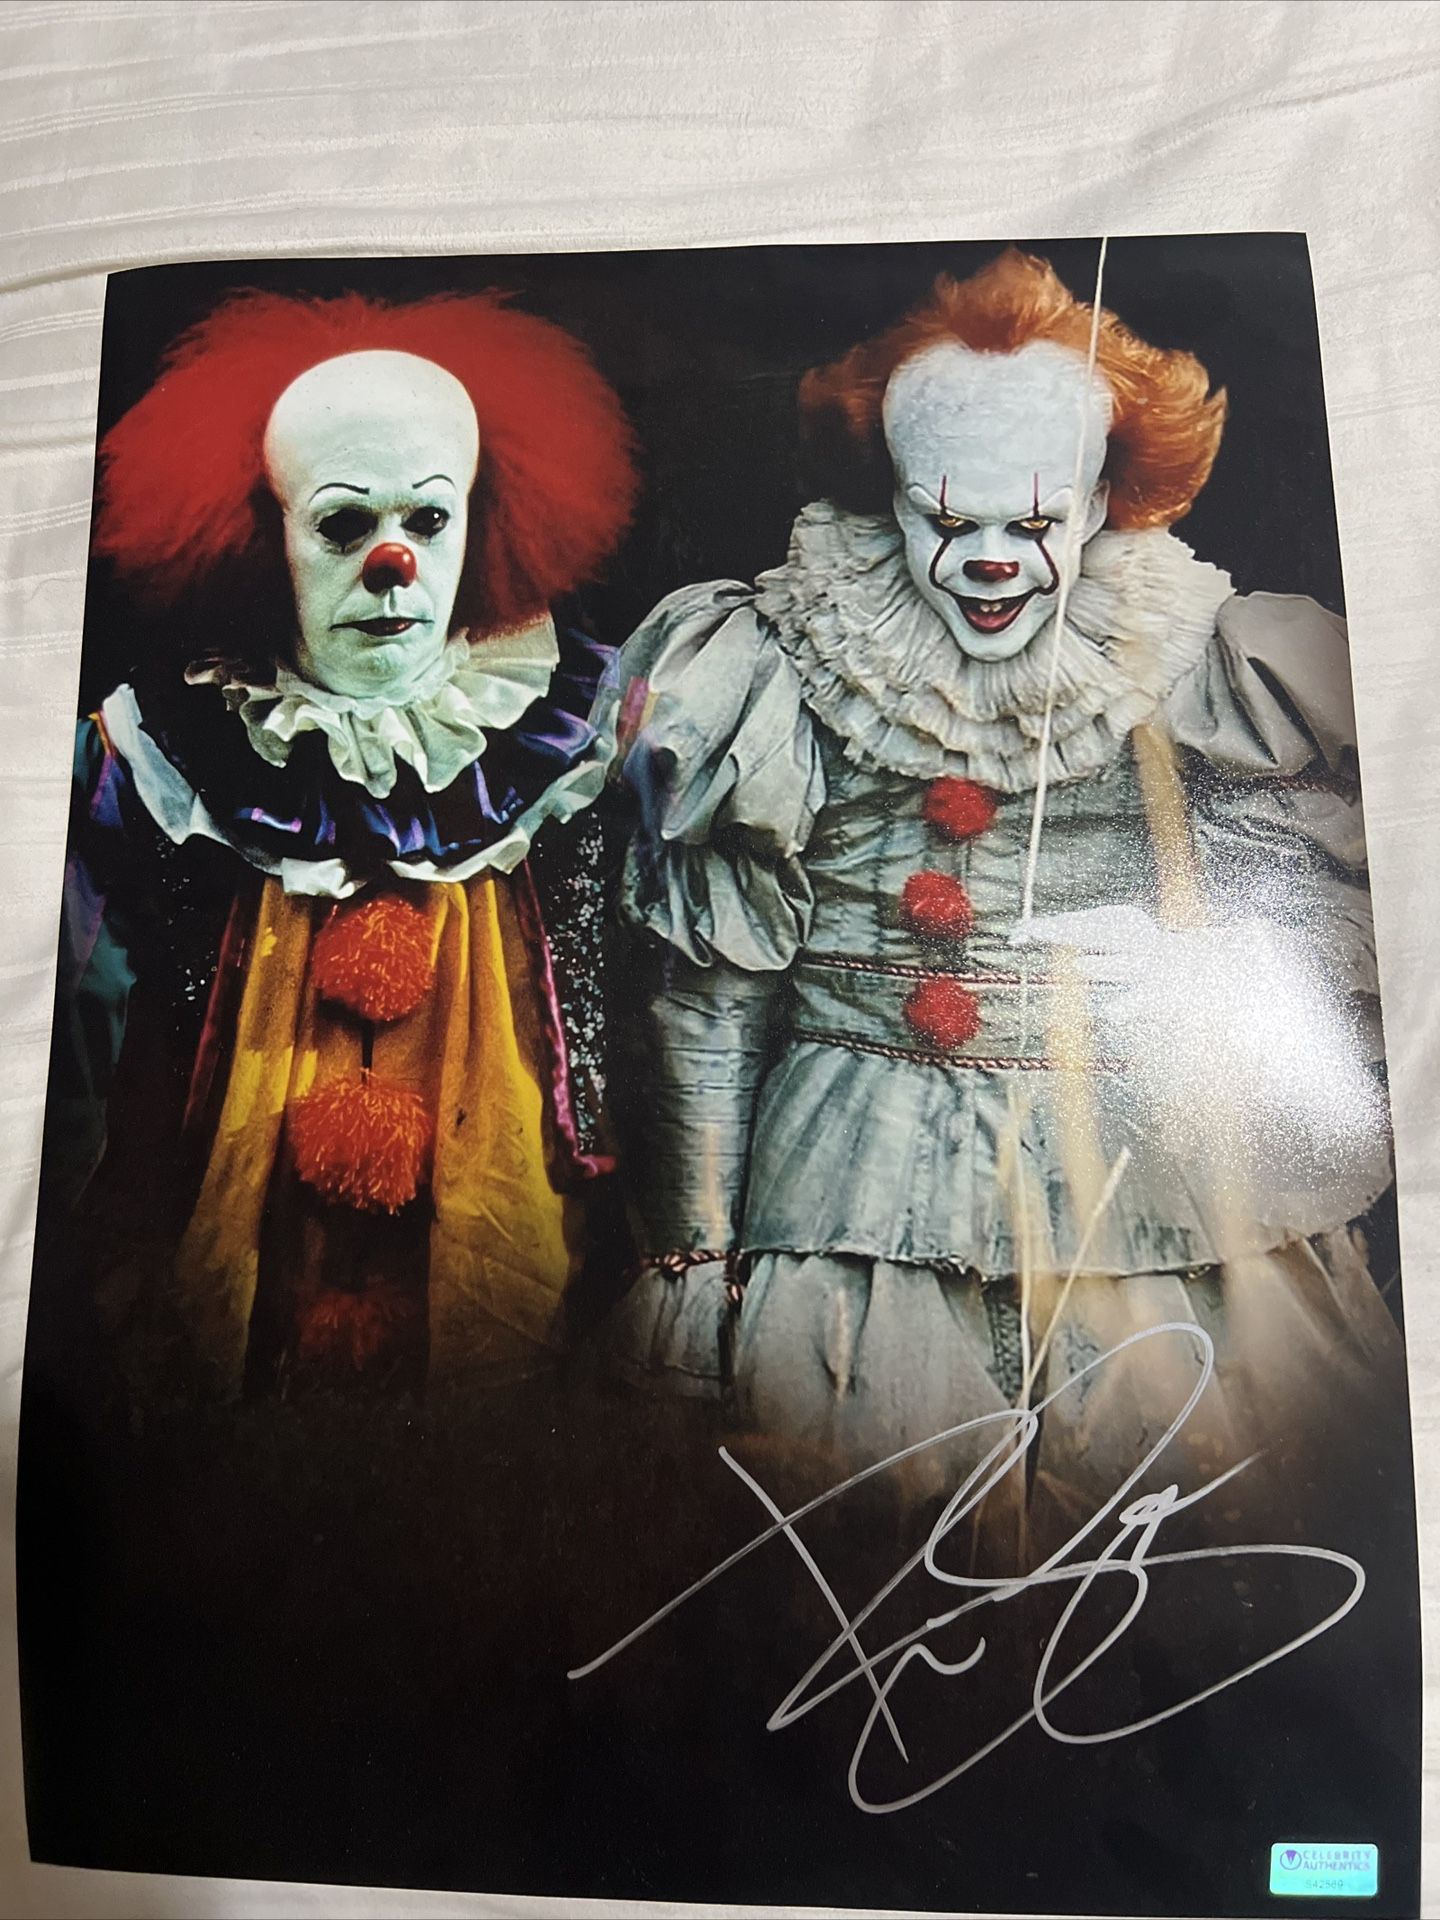 Bill Skarsgard Signed It 11x17 Movie Poster Photo Celebrity Authentic